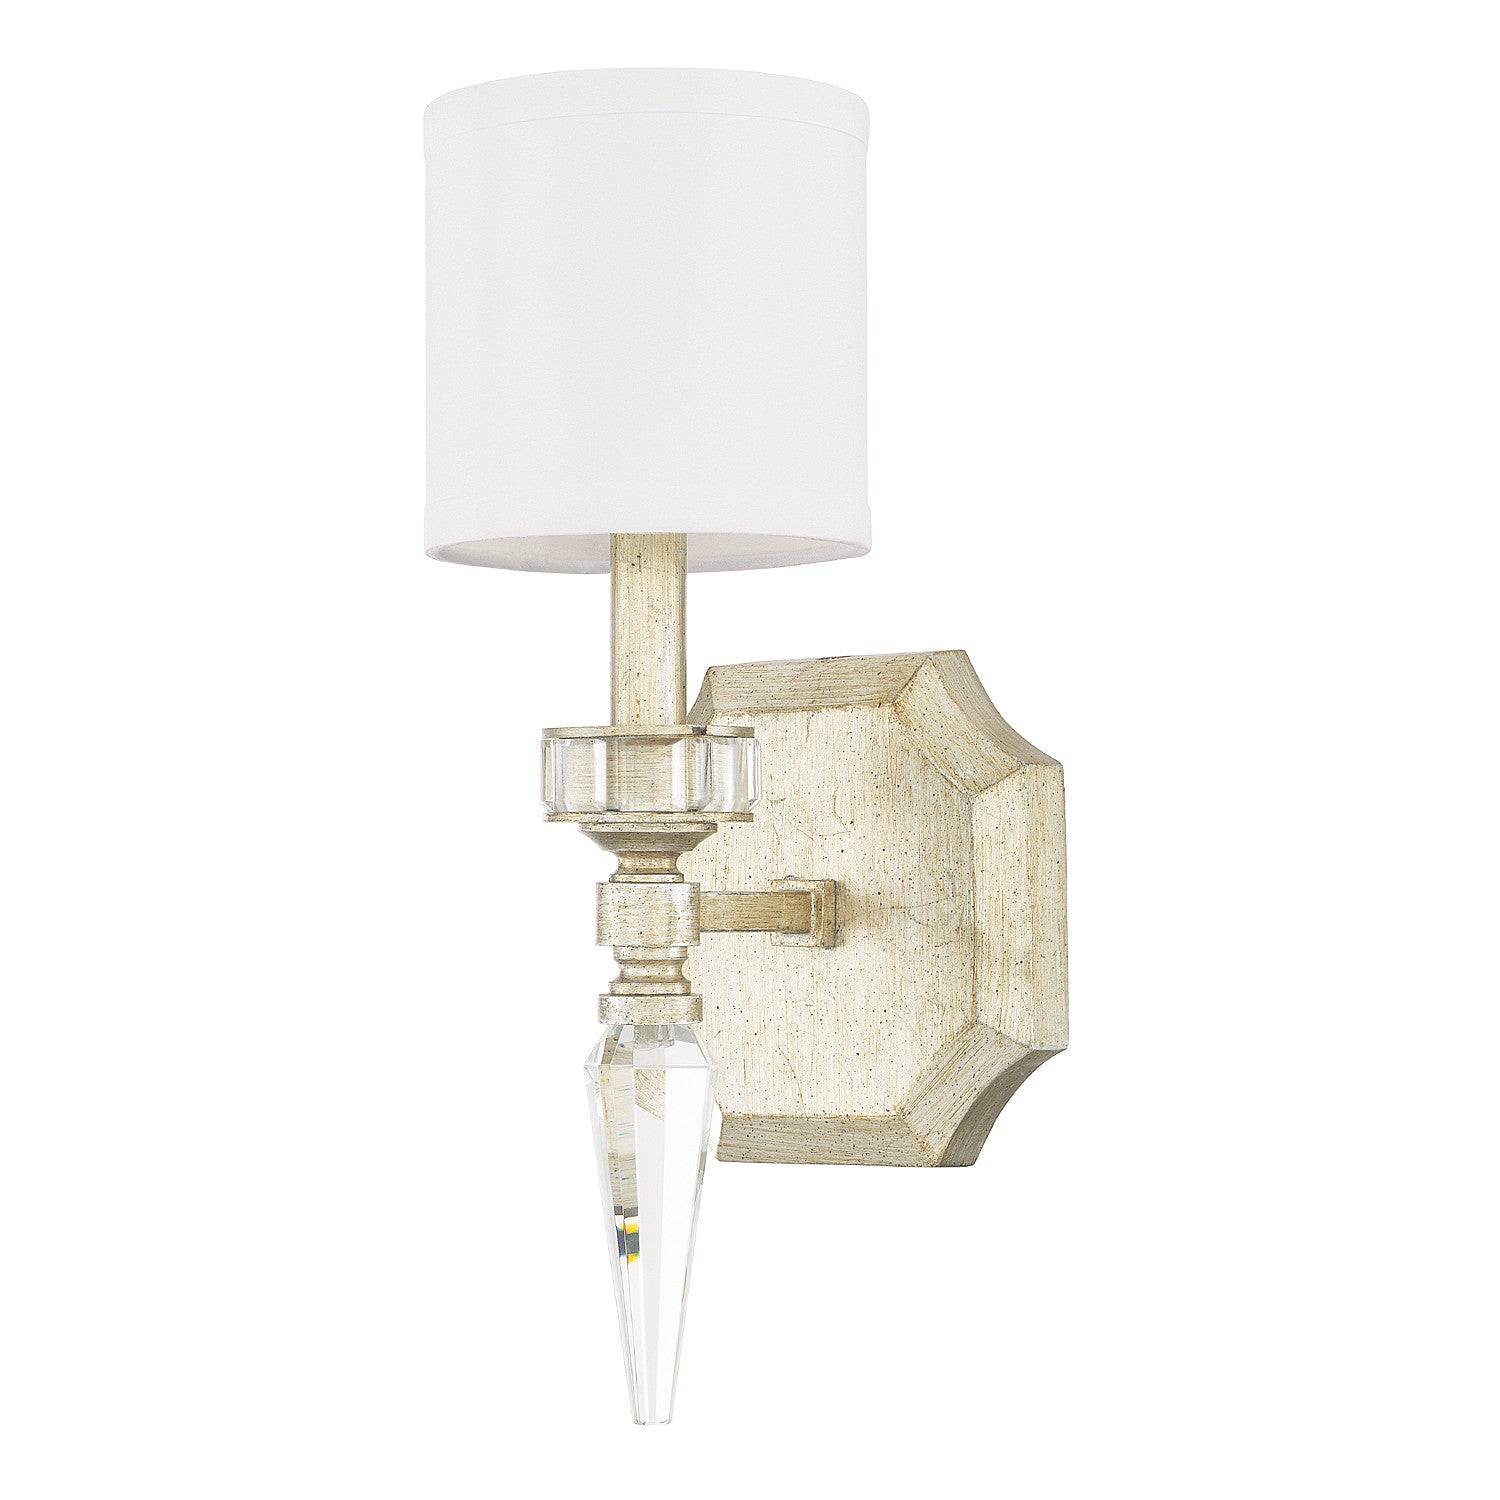 Capital Lighting Olivia 1 Light Wall Sconce in Winter Gold with Faceted Glass Stem and with Cylindrical White Shade Shade 615011WG-671